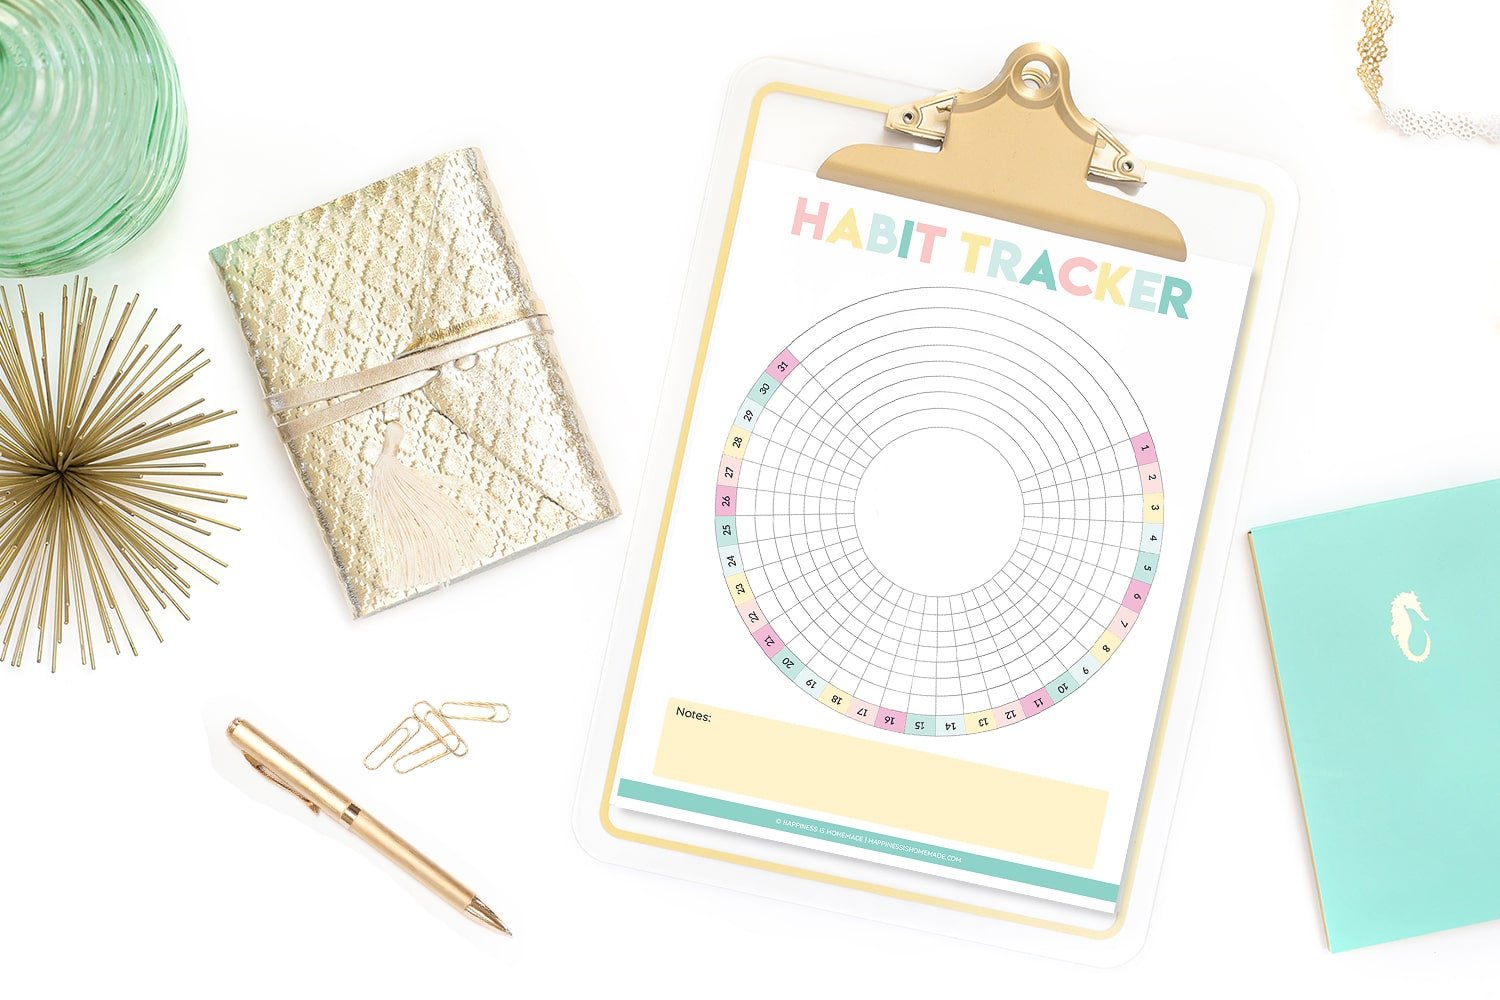 Printable circle habit tracker on gold clipboard on white background with gold wallet, gold pen, and gold paperclips